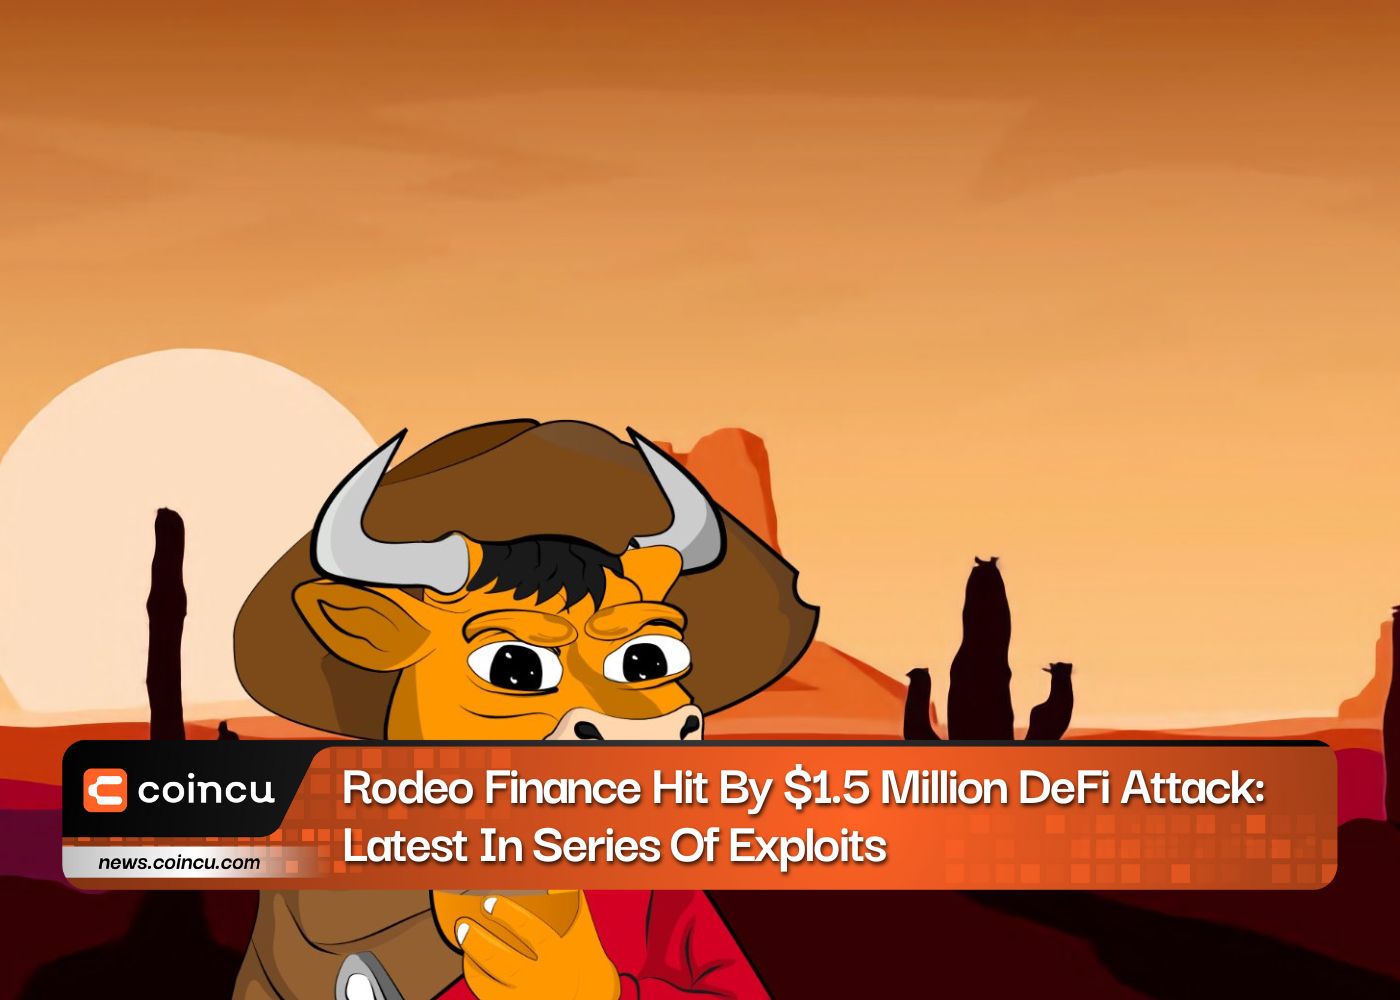 Rodeo Finance Hit By $1.5 Million DeFi Attack: Latest In Series Of Exploits